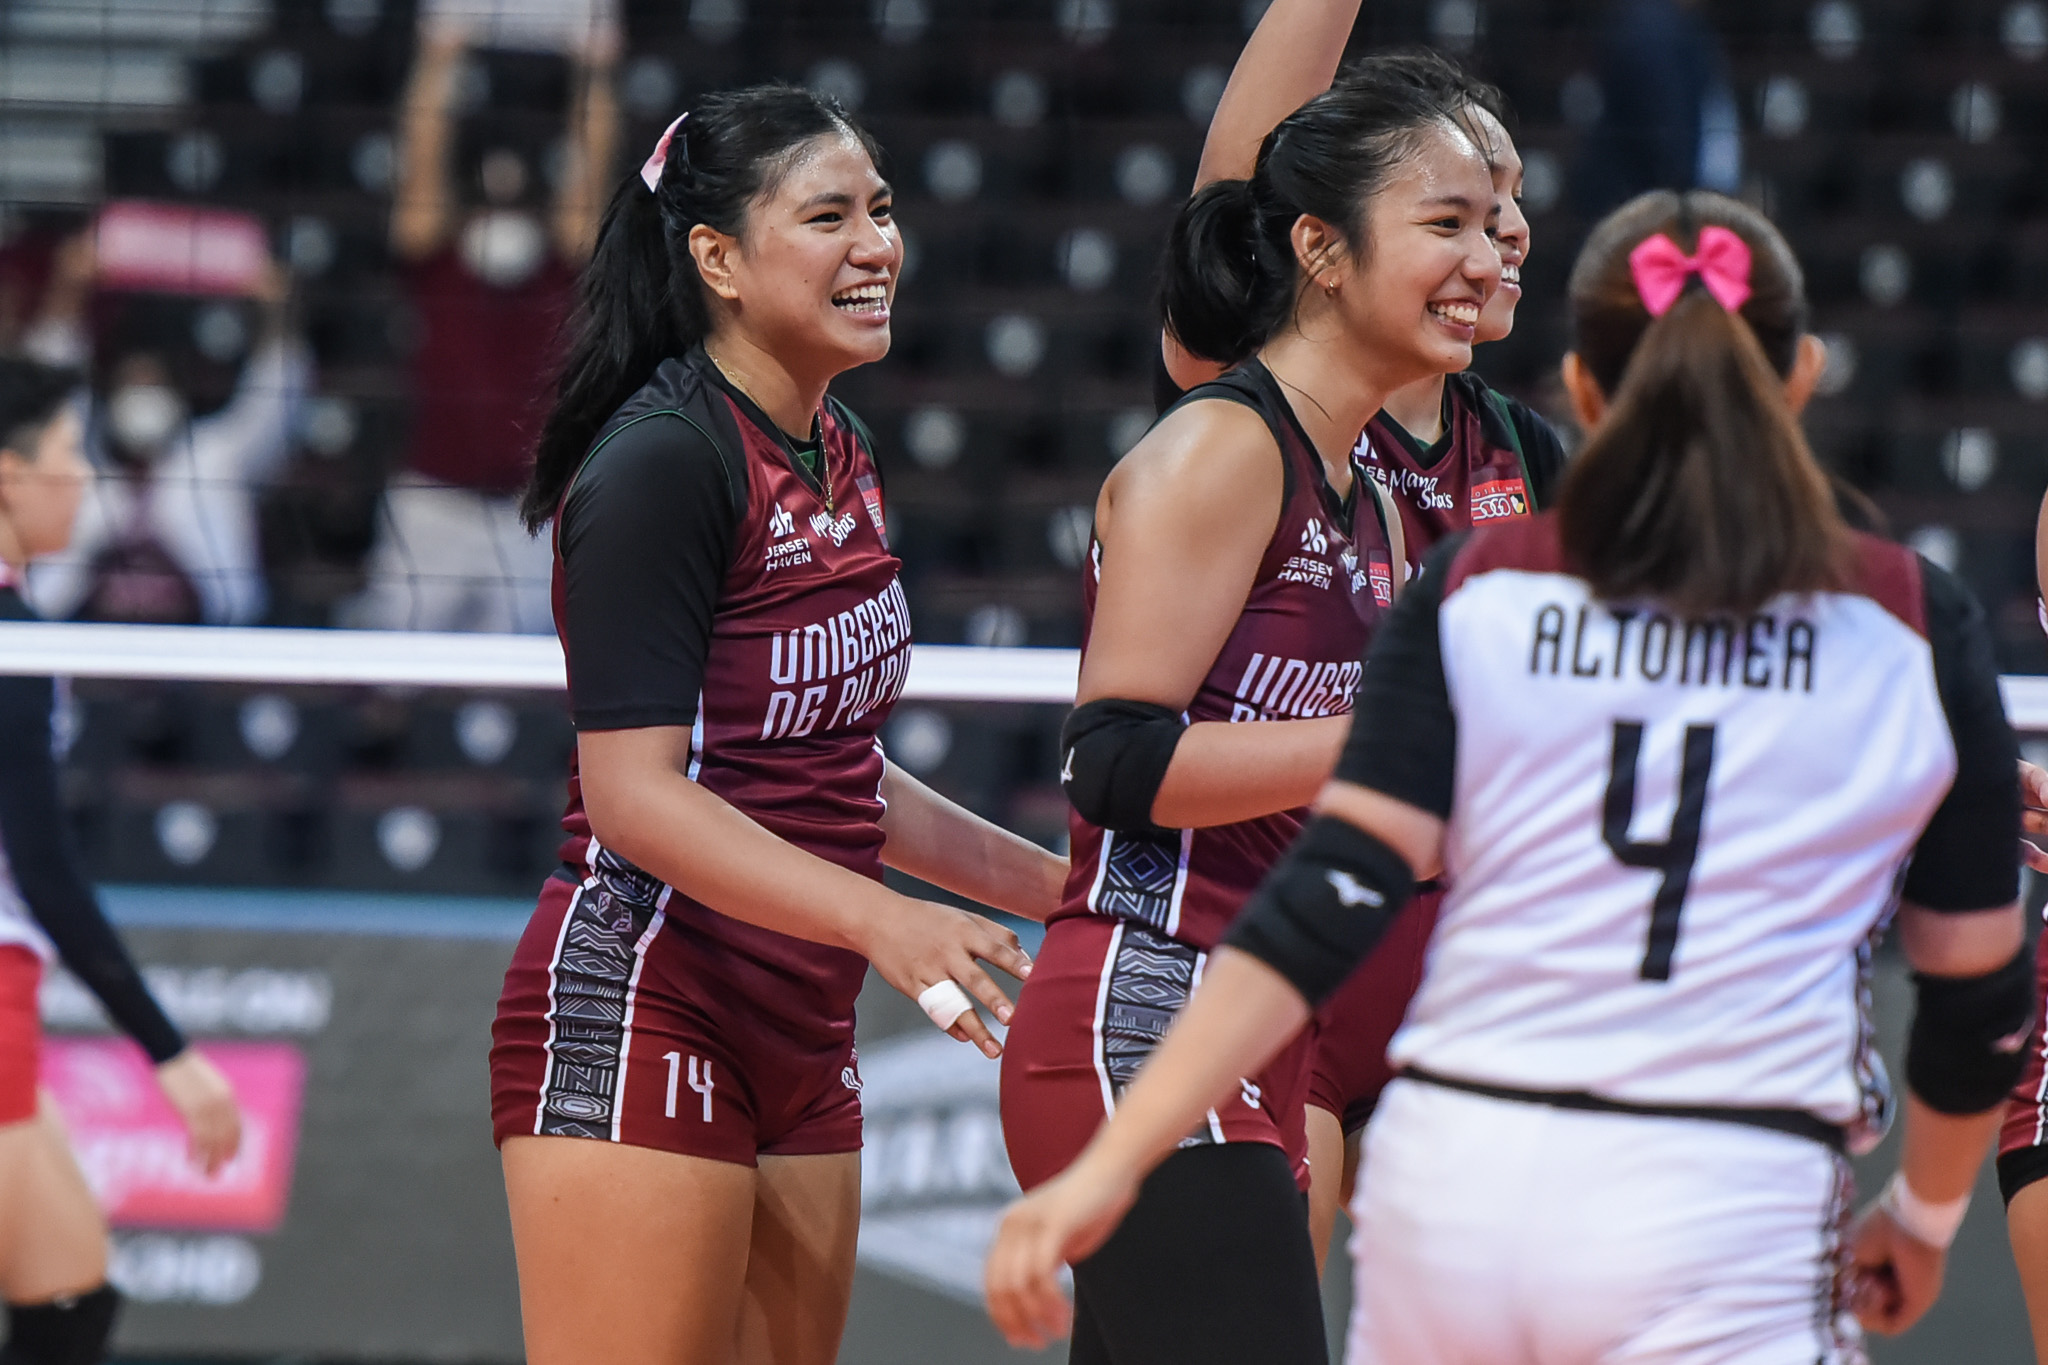 UAAP-85-WVB-UE-vs.-UP-Abi-Goc-5856 Goc, Ytang will continue to give all for UP amid greater battle News UAAP UP Volleyball  - philippine sports news